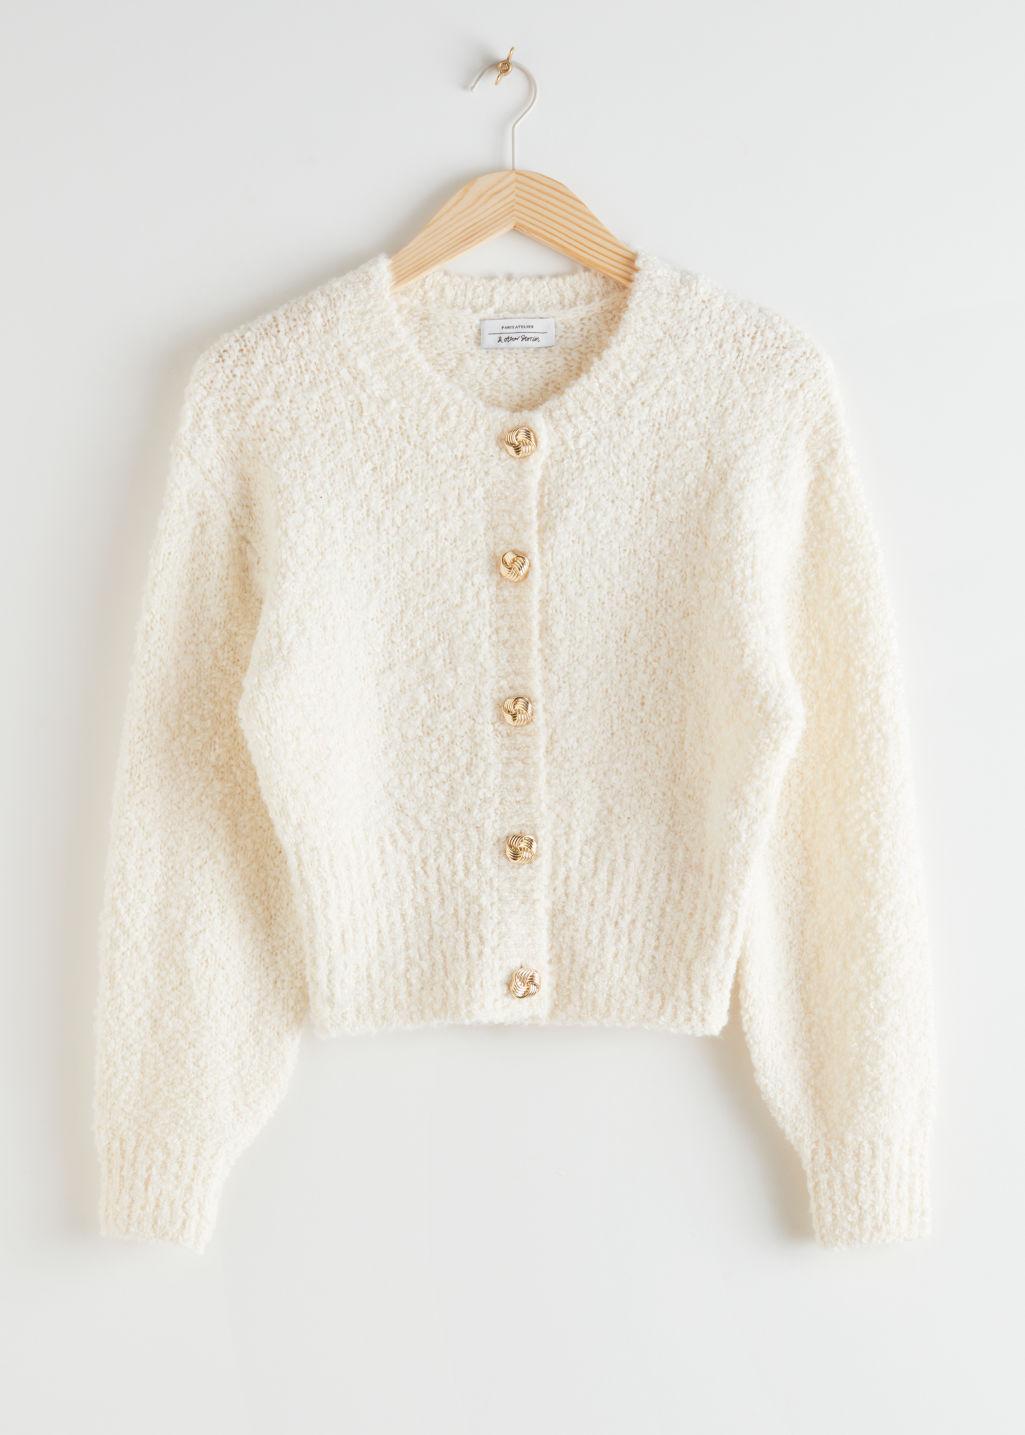 & Other Stories Bouclé Knit Cropped Cardigan in White - Lyst